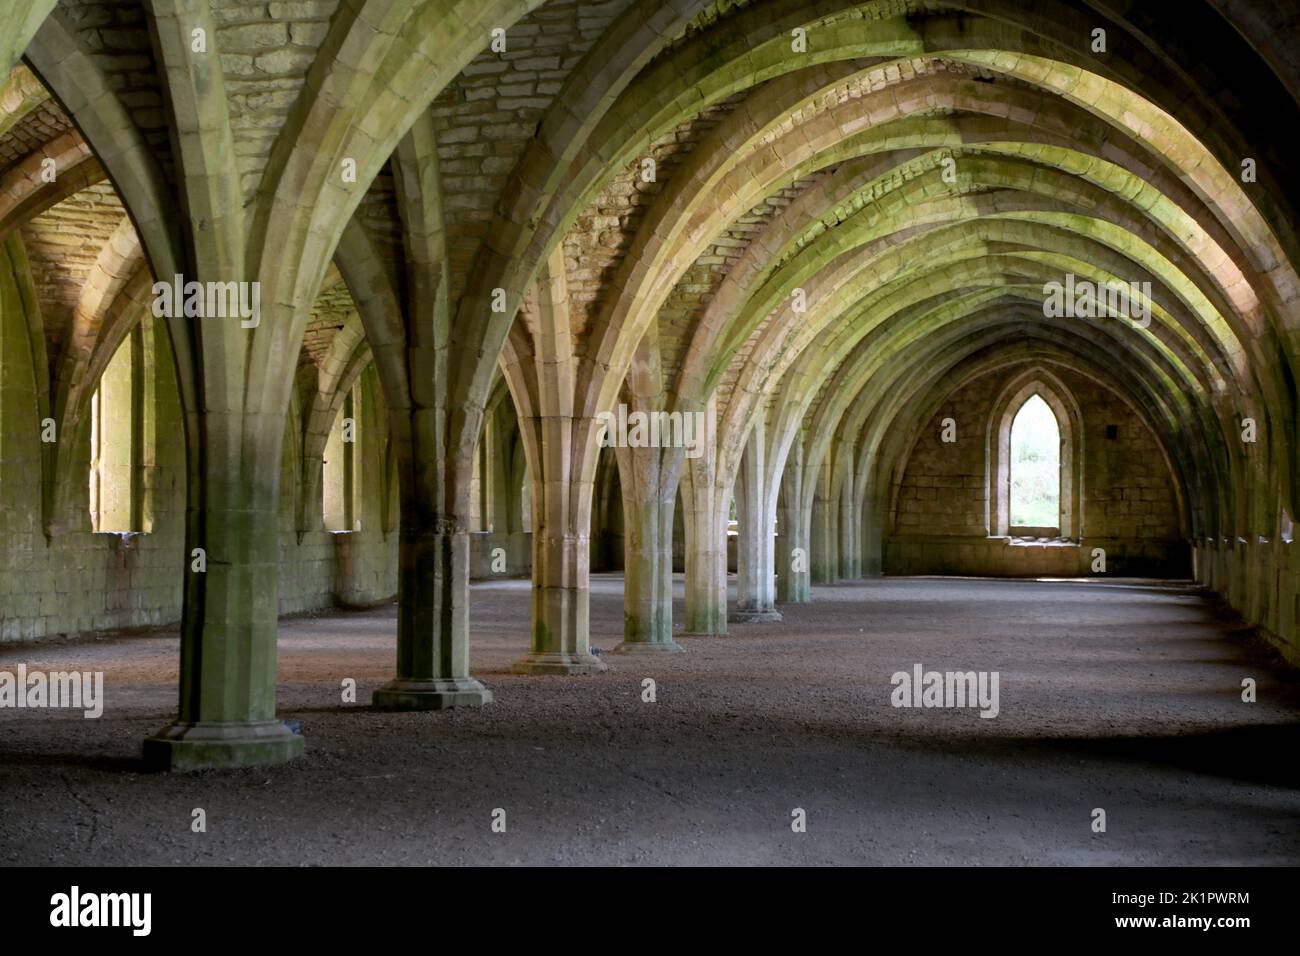 The vaulted cellarium (larder) of Fountains Abbey, in North Yorkshire, England, UK. Stock Photo